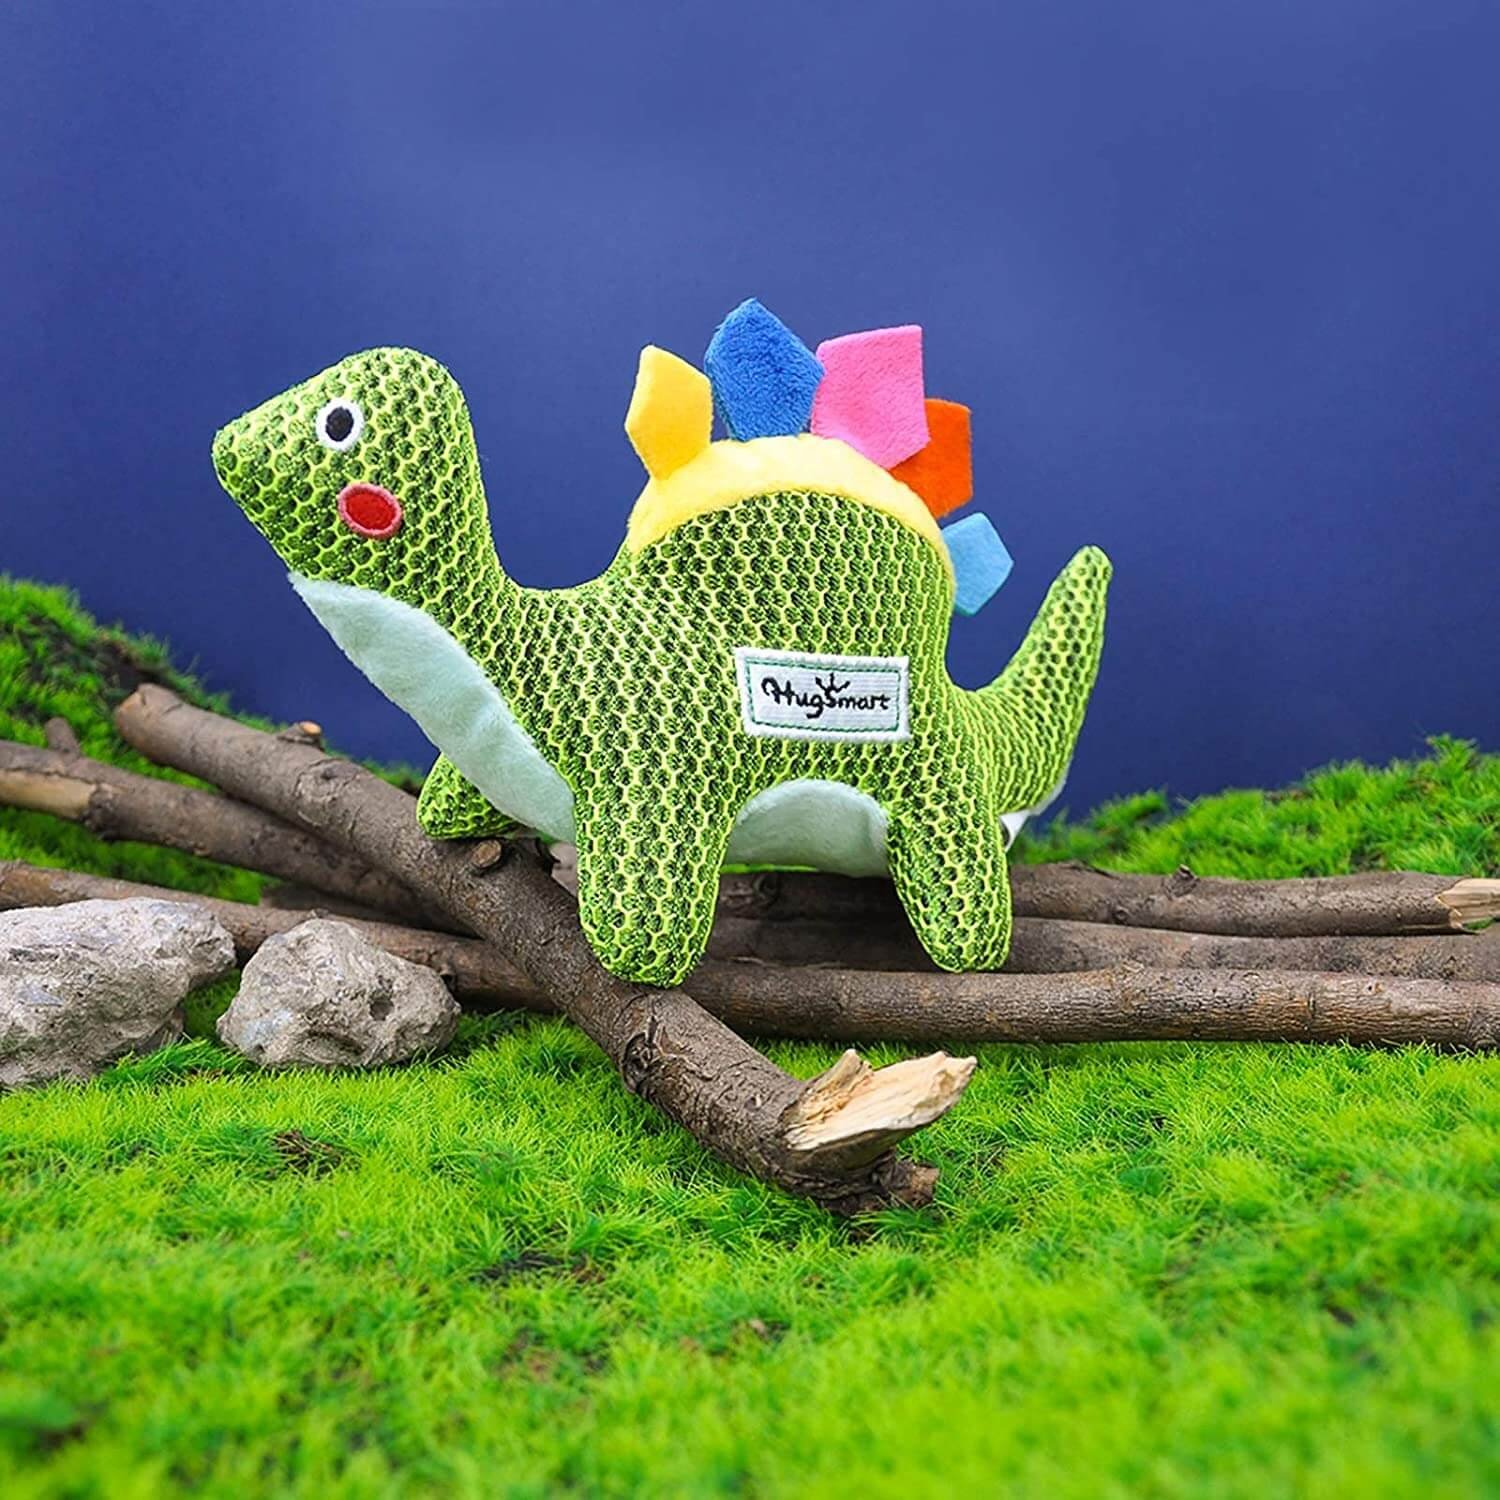 Negative Reviews and Concerns about the Extreme Dino Dog Toy